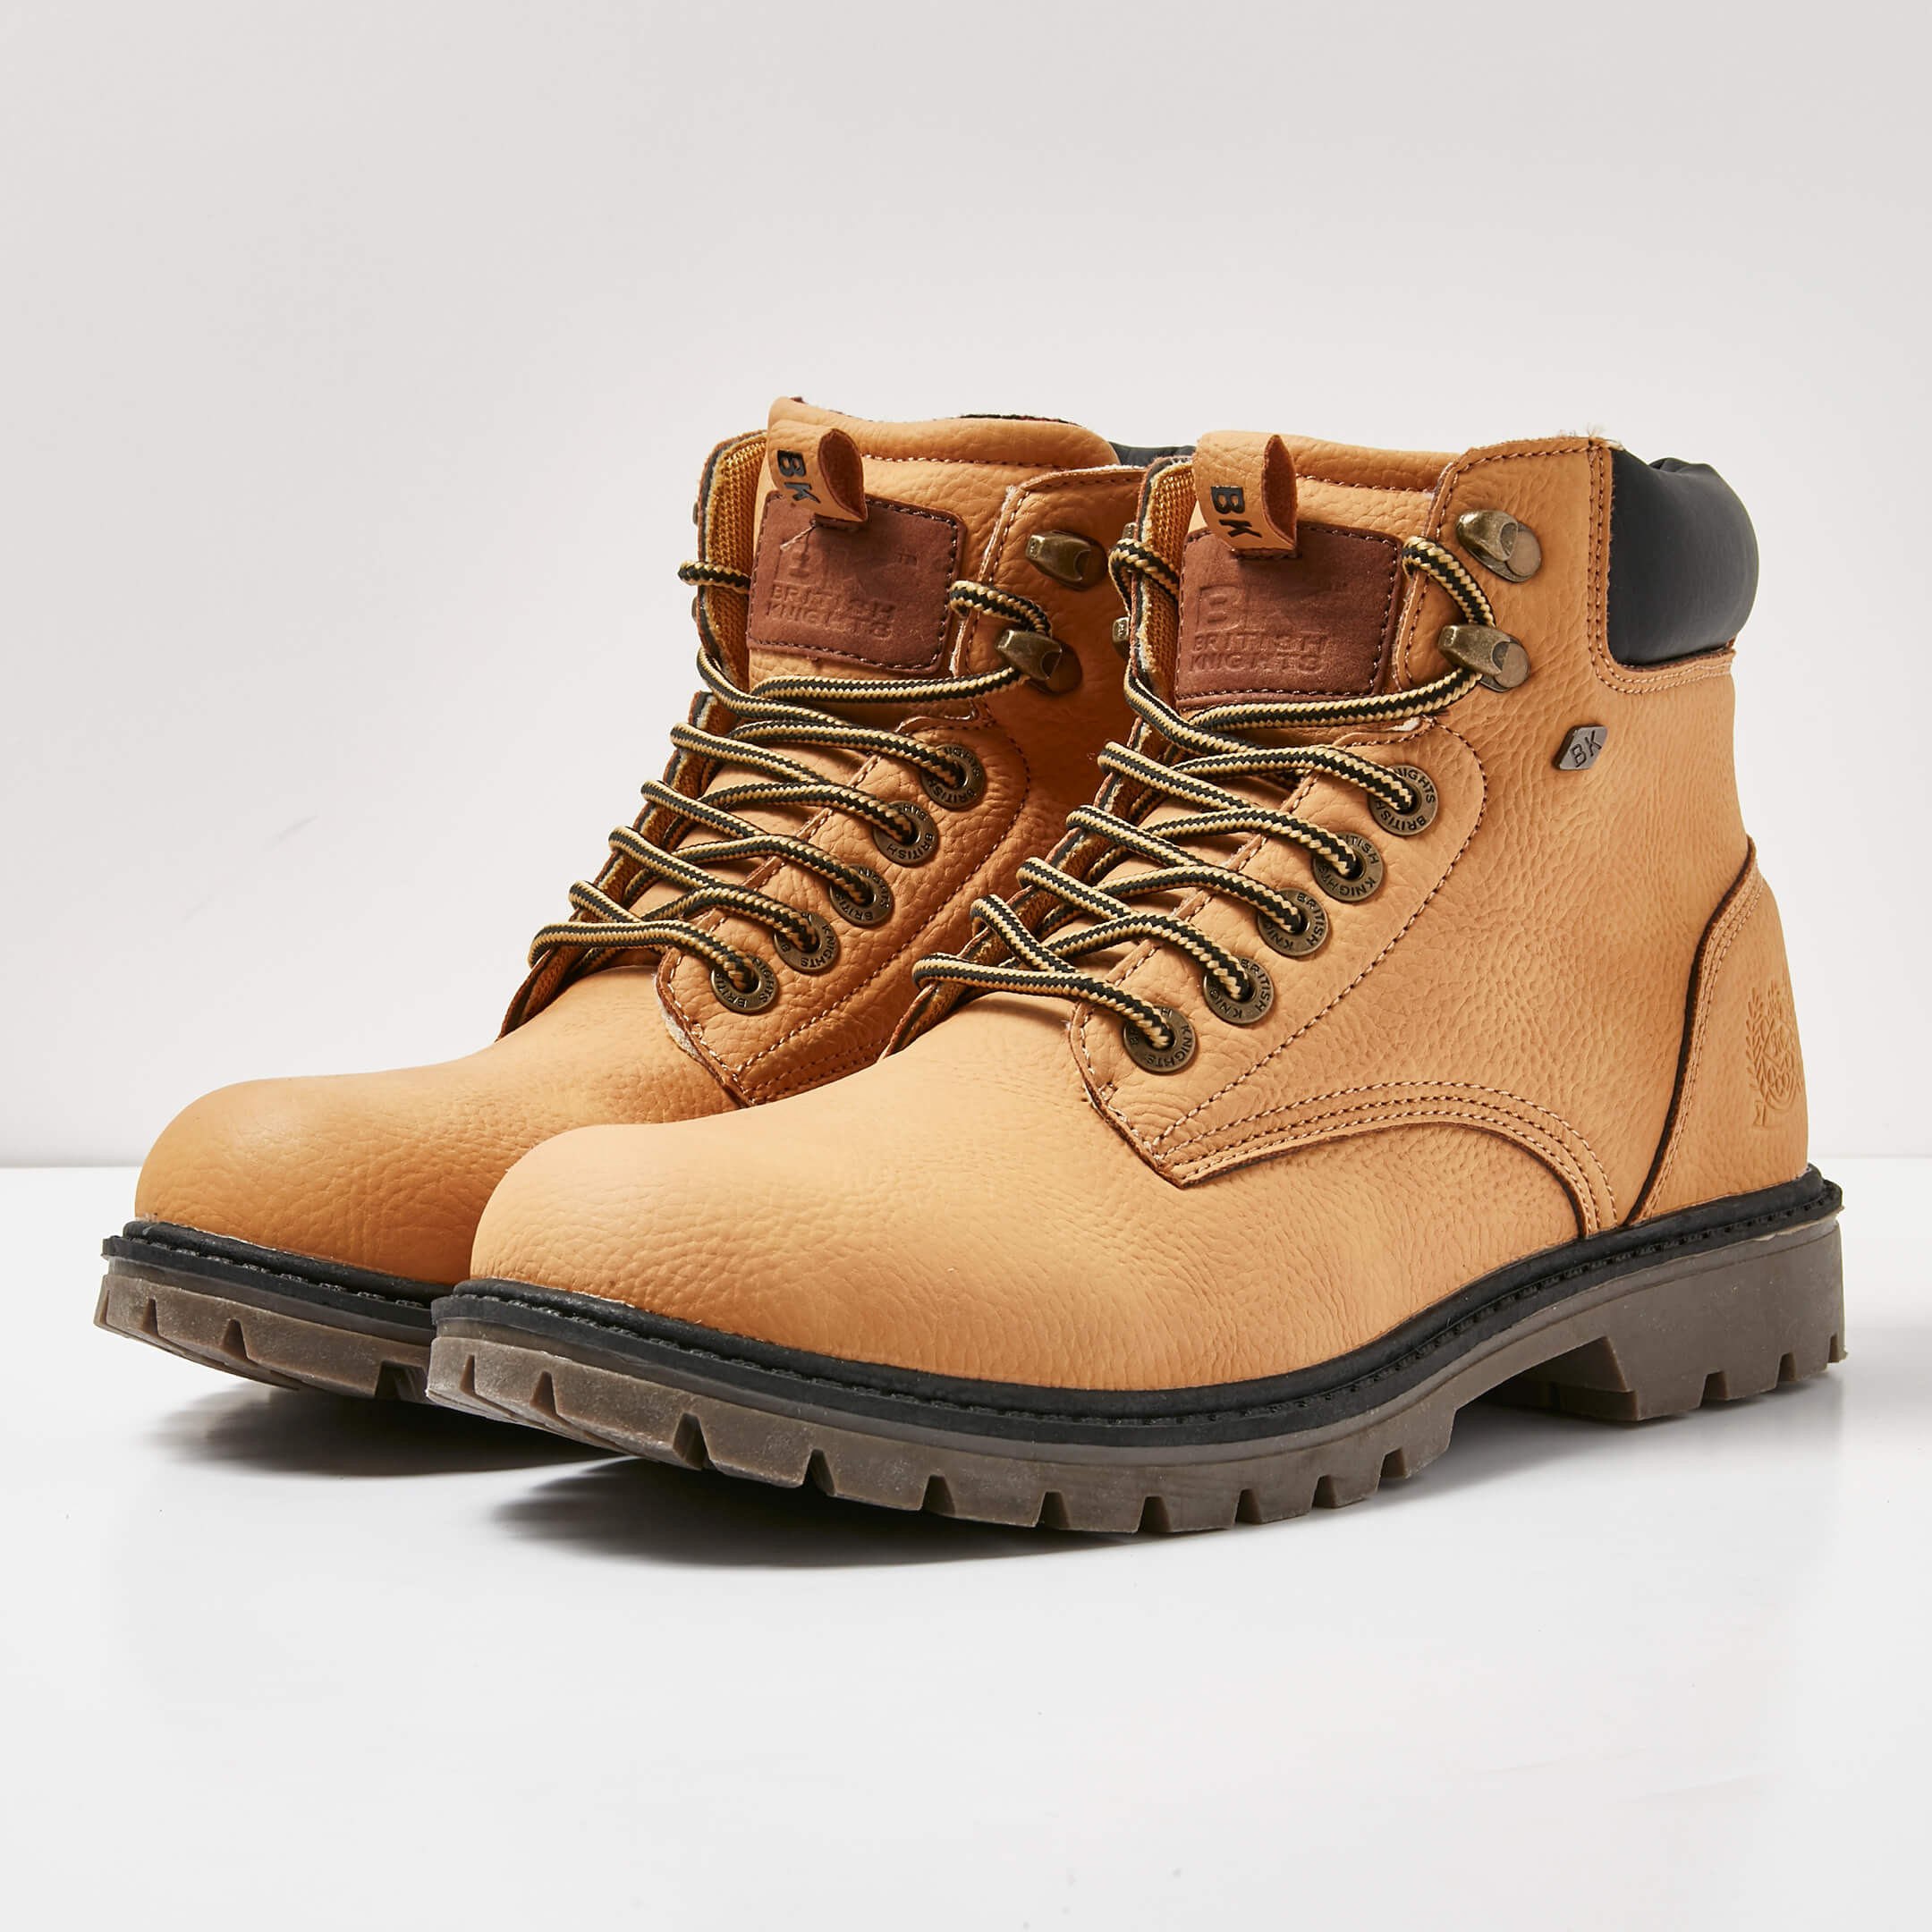 Buy > british knight boots > in stock